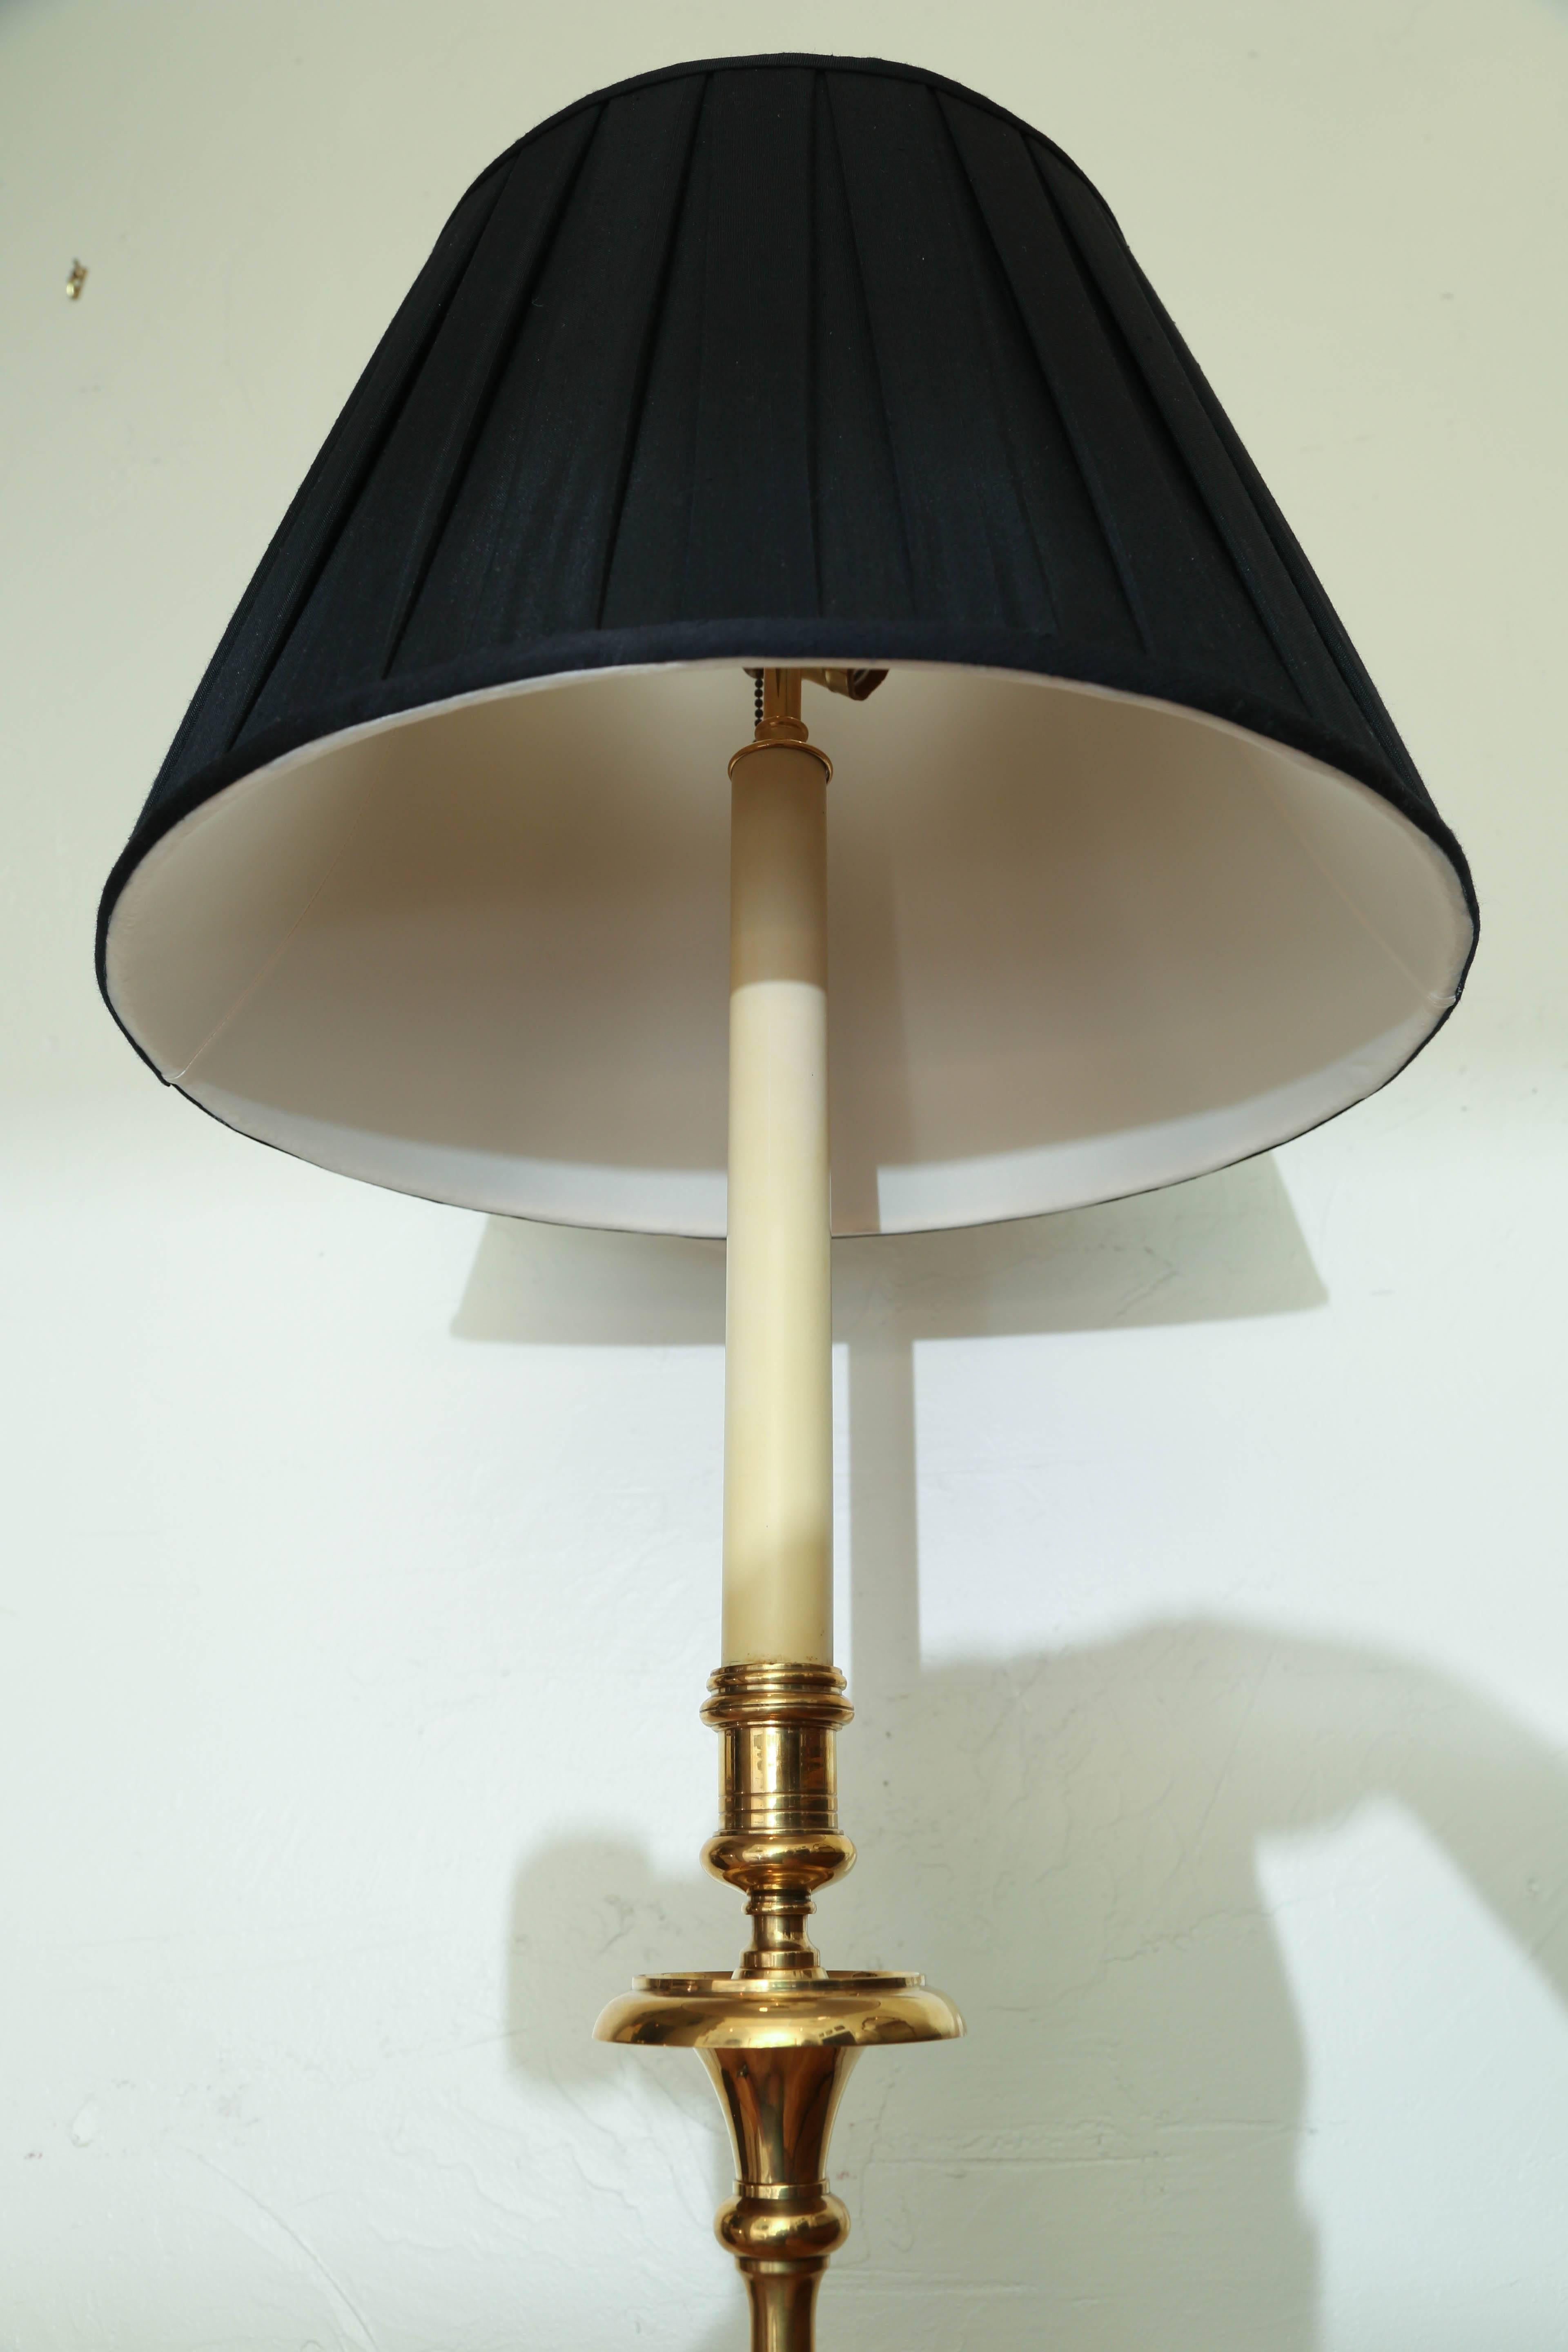 20th Century Solid Brass Candlestick Floor Lamp by Chapman